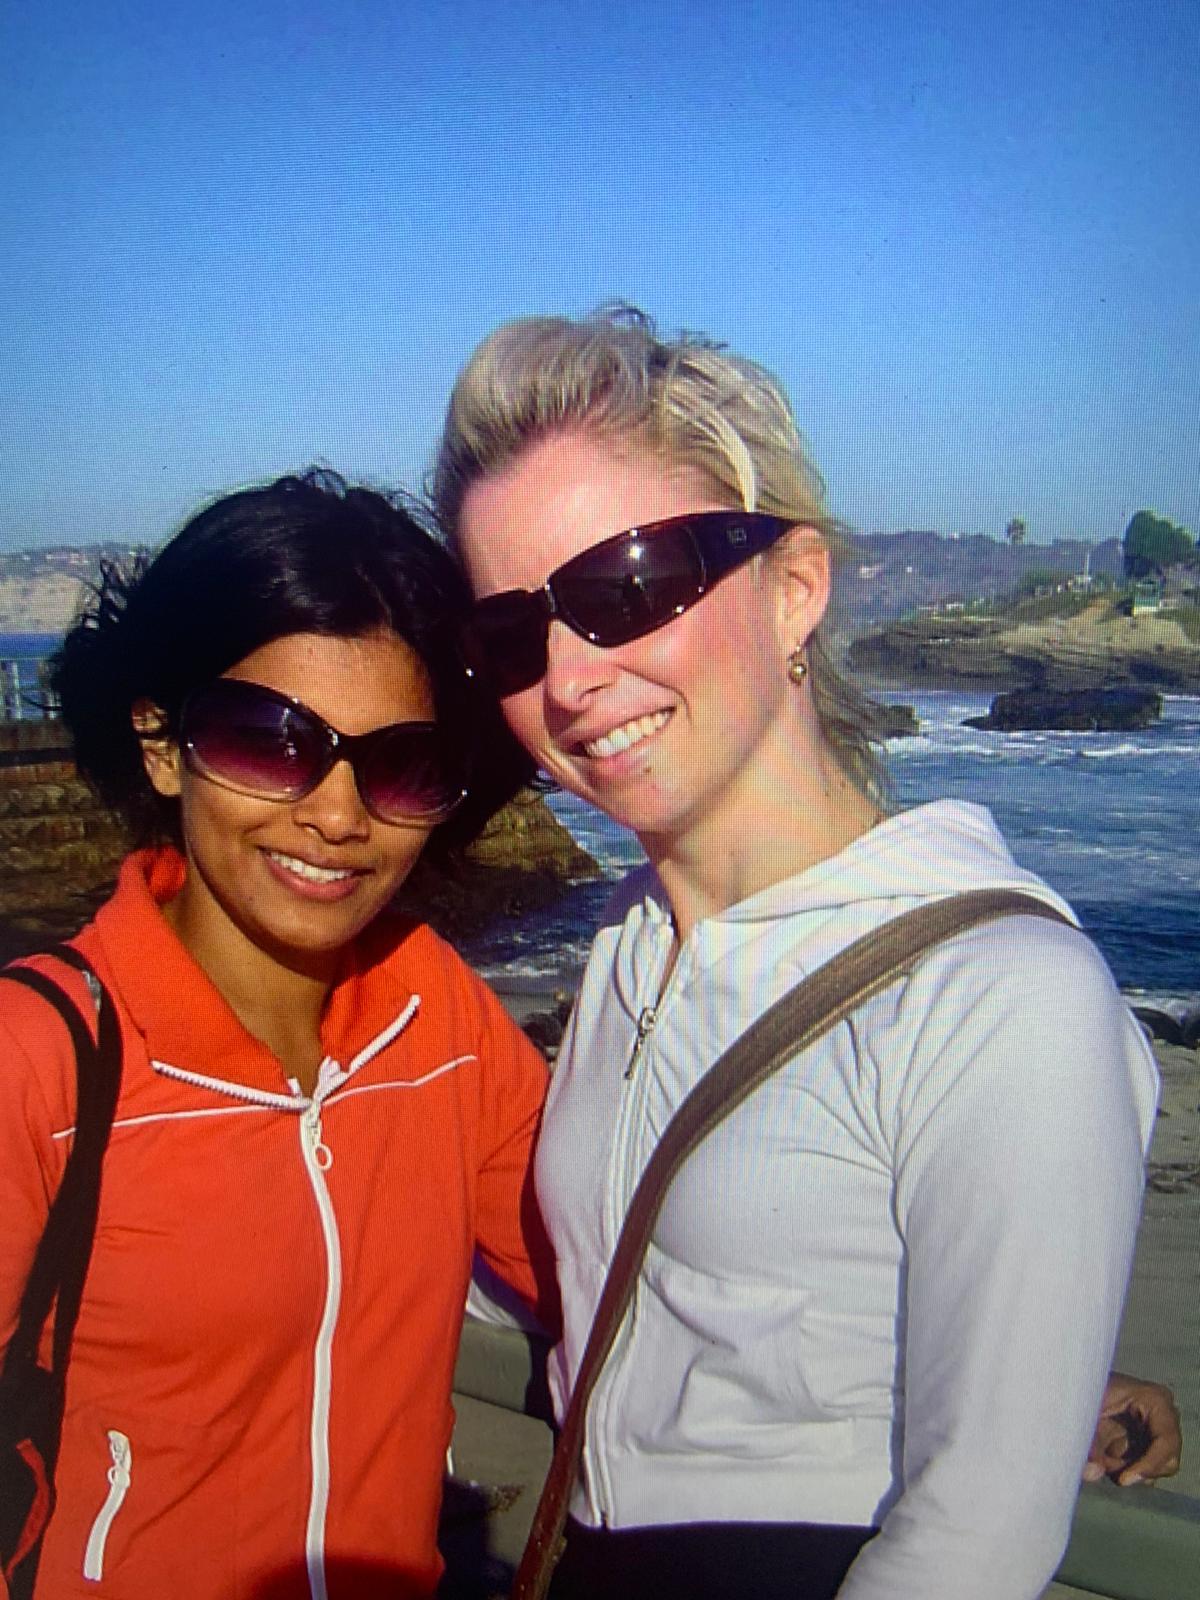 Madi is also delighted to be working again with colleagues who were once study partners, like Dr Samantha Stehbens, an ARC Future Fellow and IMB Fellow. Madi and Sam are pictured here on their San Diego trip in 2006.